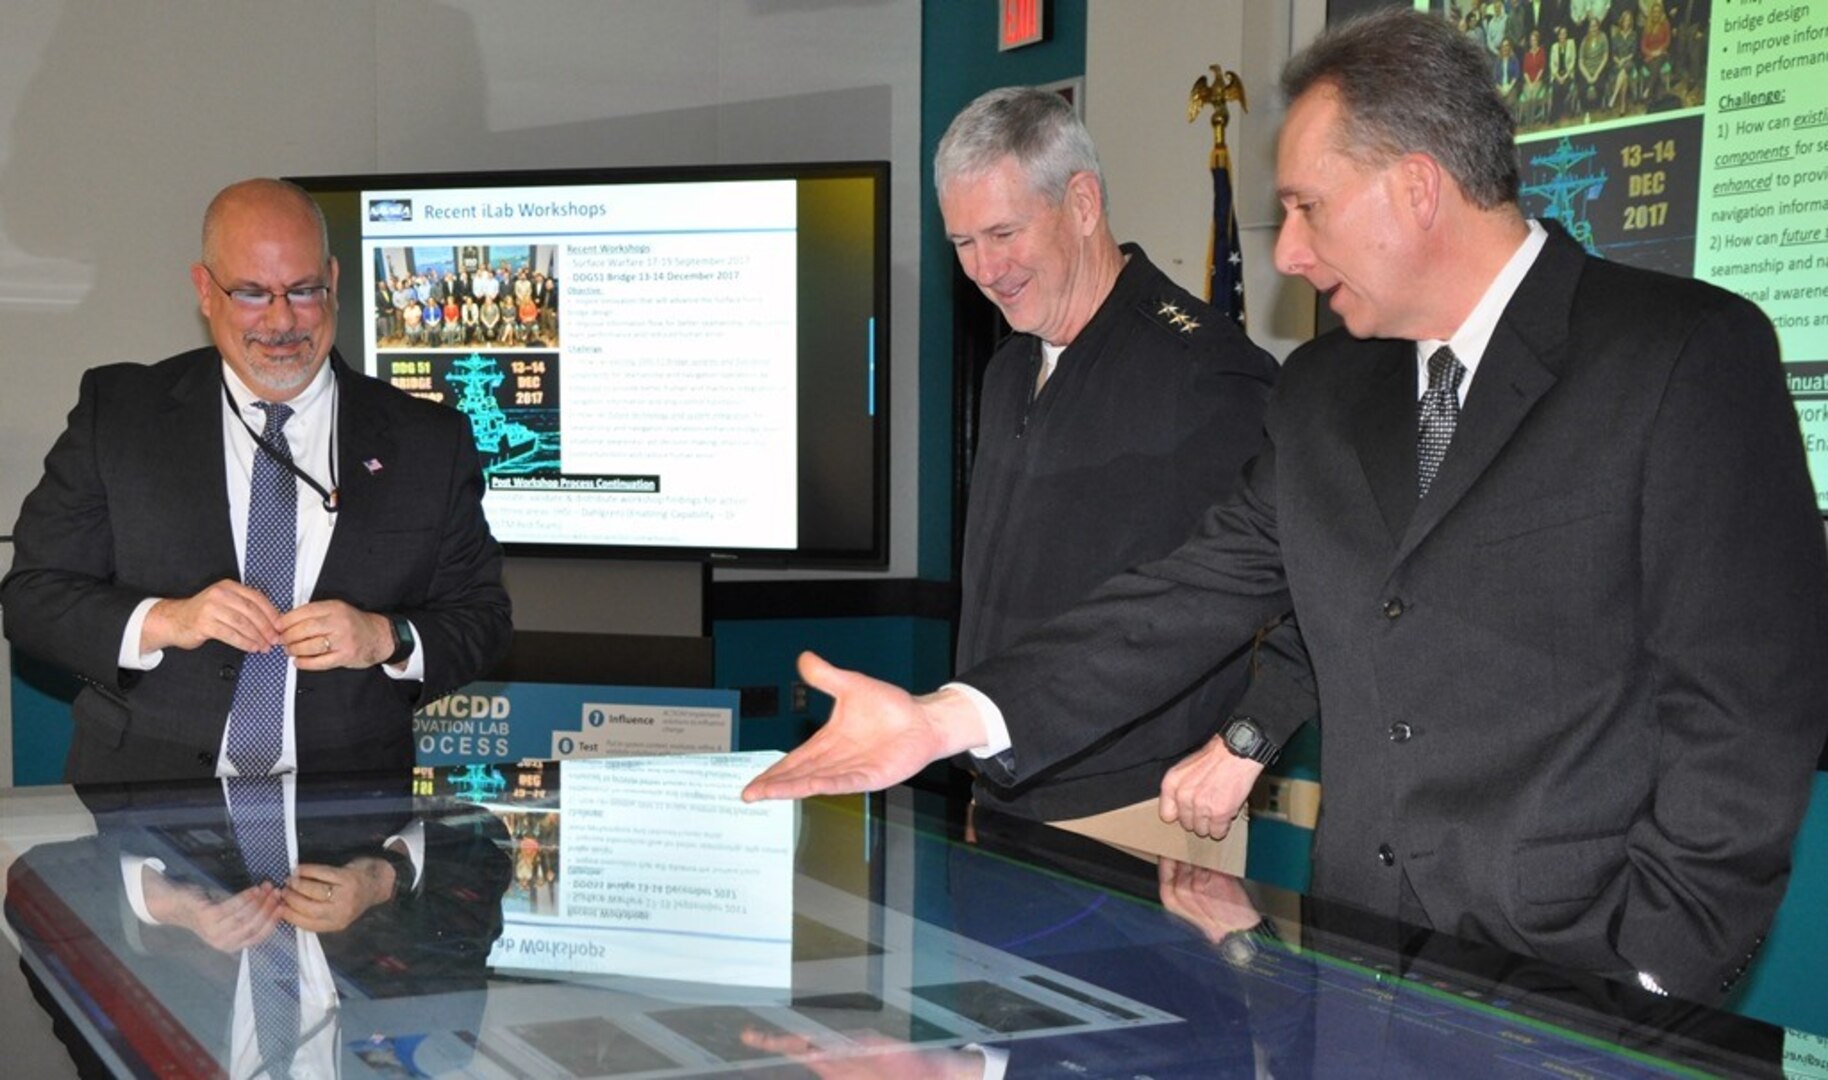 IMAGE: DAHLGREN, Va. (Jan. 16, 2018)  – Naval Surface Warfare Center Dahlgren Division (NSWCDD) Innovation Lab (iLab) Director of Innovation Nelson Mills briefs the Commander of Naval Sea Systems Command (NAVSEA) Vice Adm. Thomas Moore and NSWCDD Technical Director John Fiore on the use of digital collaboration tables as visual aids for surface ships. The collaboration table could provide capabilities to view ship doctrine, navigation tracks, radar information, and Automatic Identification System information for situational awareness. The iLab – equipped with state-of-the-art equipment, services, and trained personnel – opened for business last summer as an intensive collaborative environment where the command's experts work to speed up and maximize corporate innovative solutions across the laboratory.